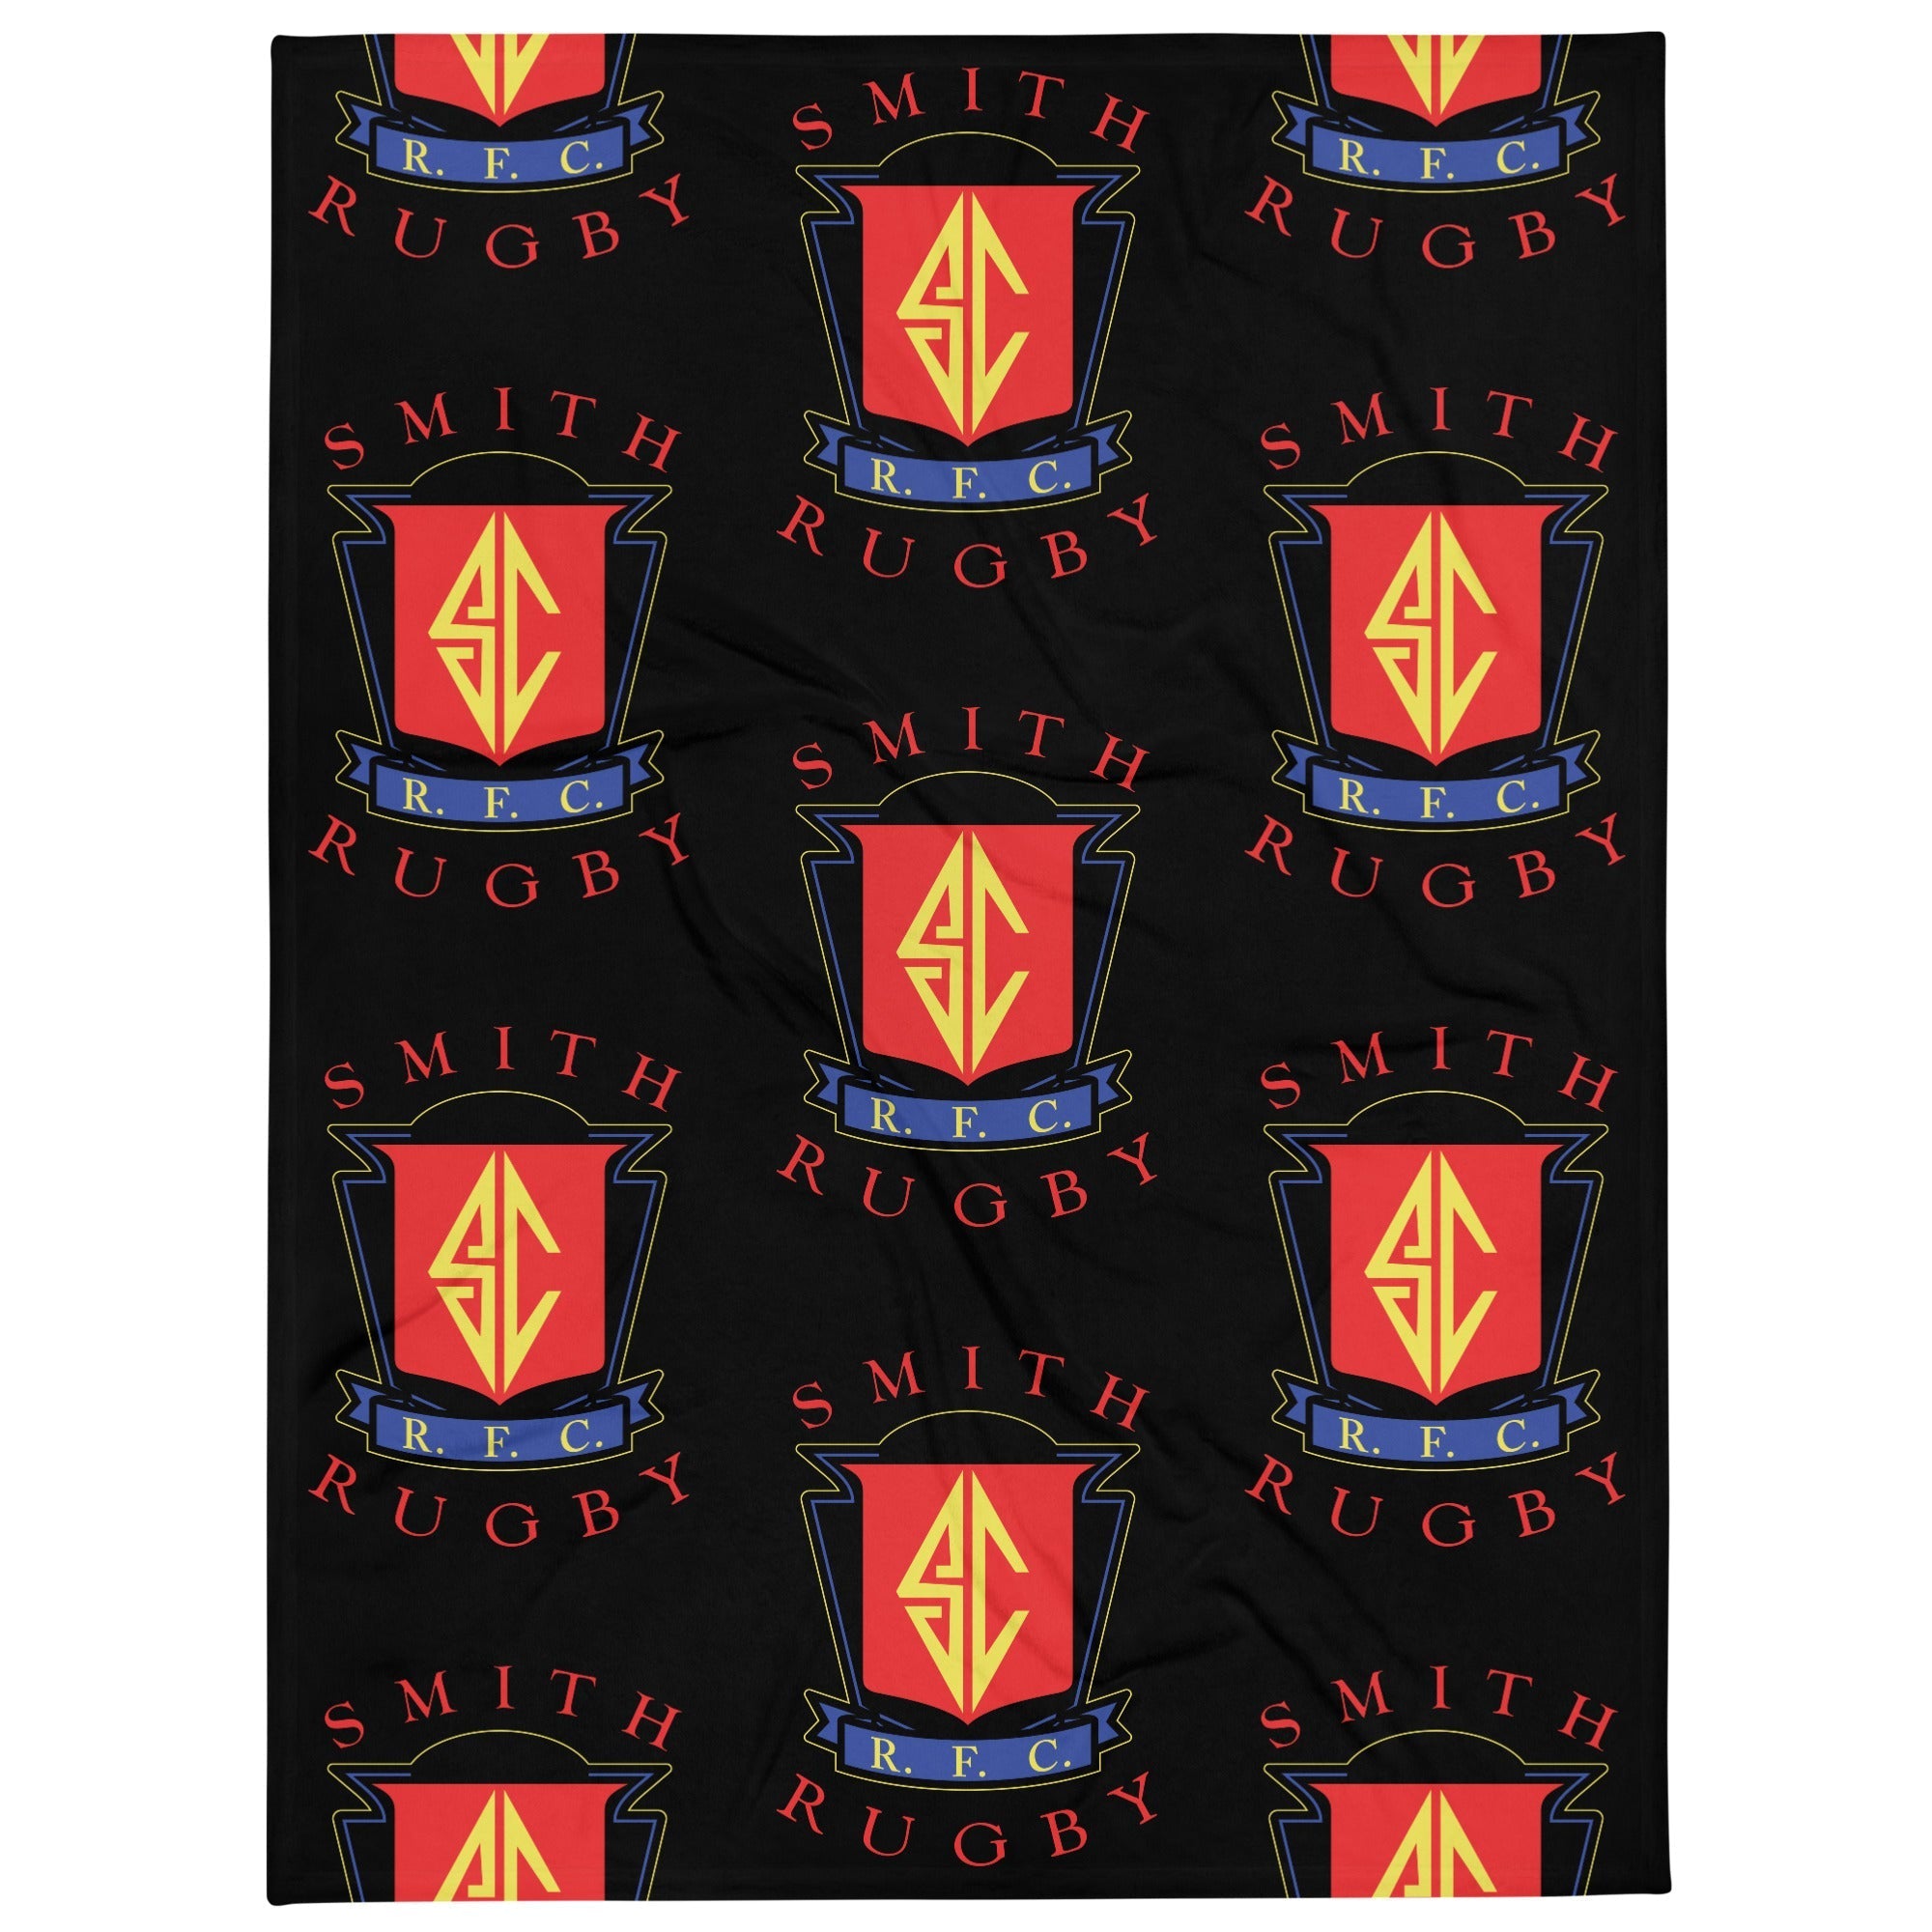 Rugby Imports Smith College RFC Throw Blanket